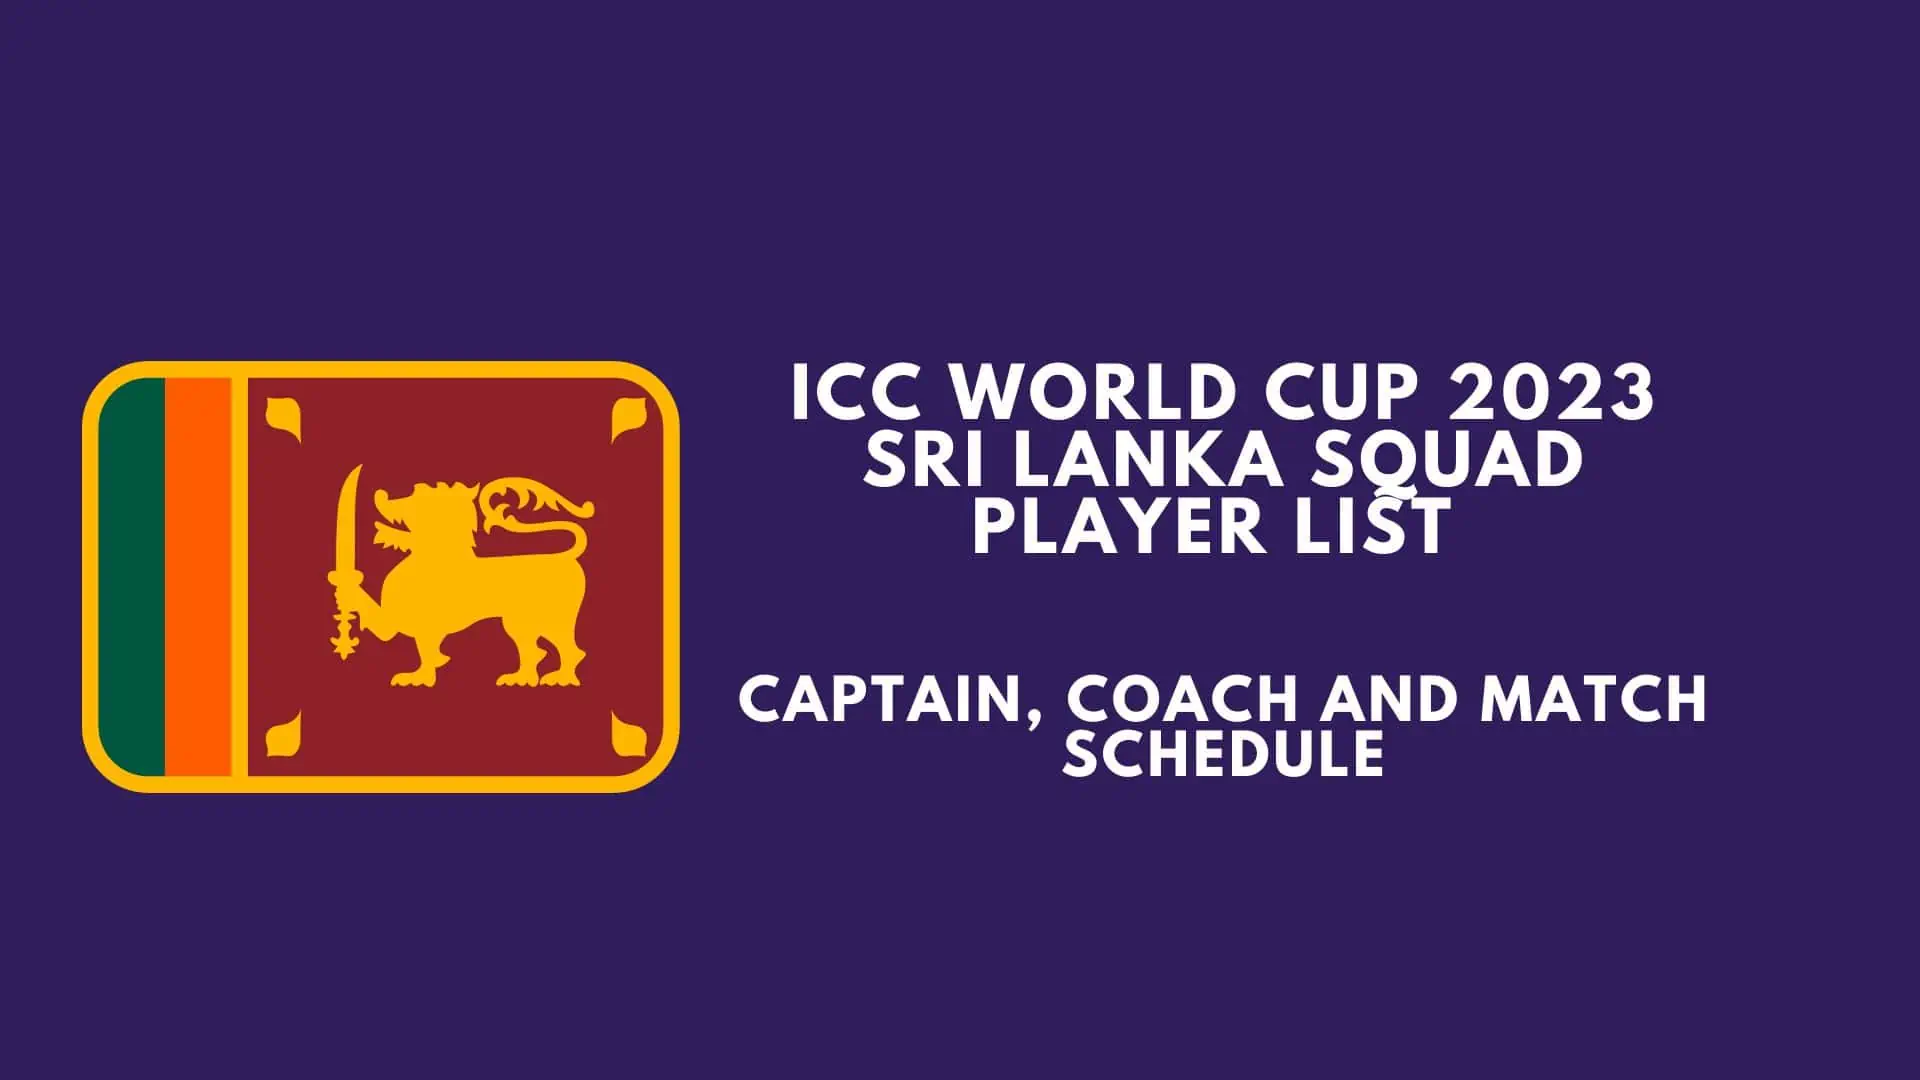 ICC World Cup 2023 Sri Lanka Squad Player List, Captain, Coach and Match Schedule